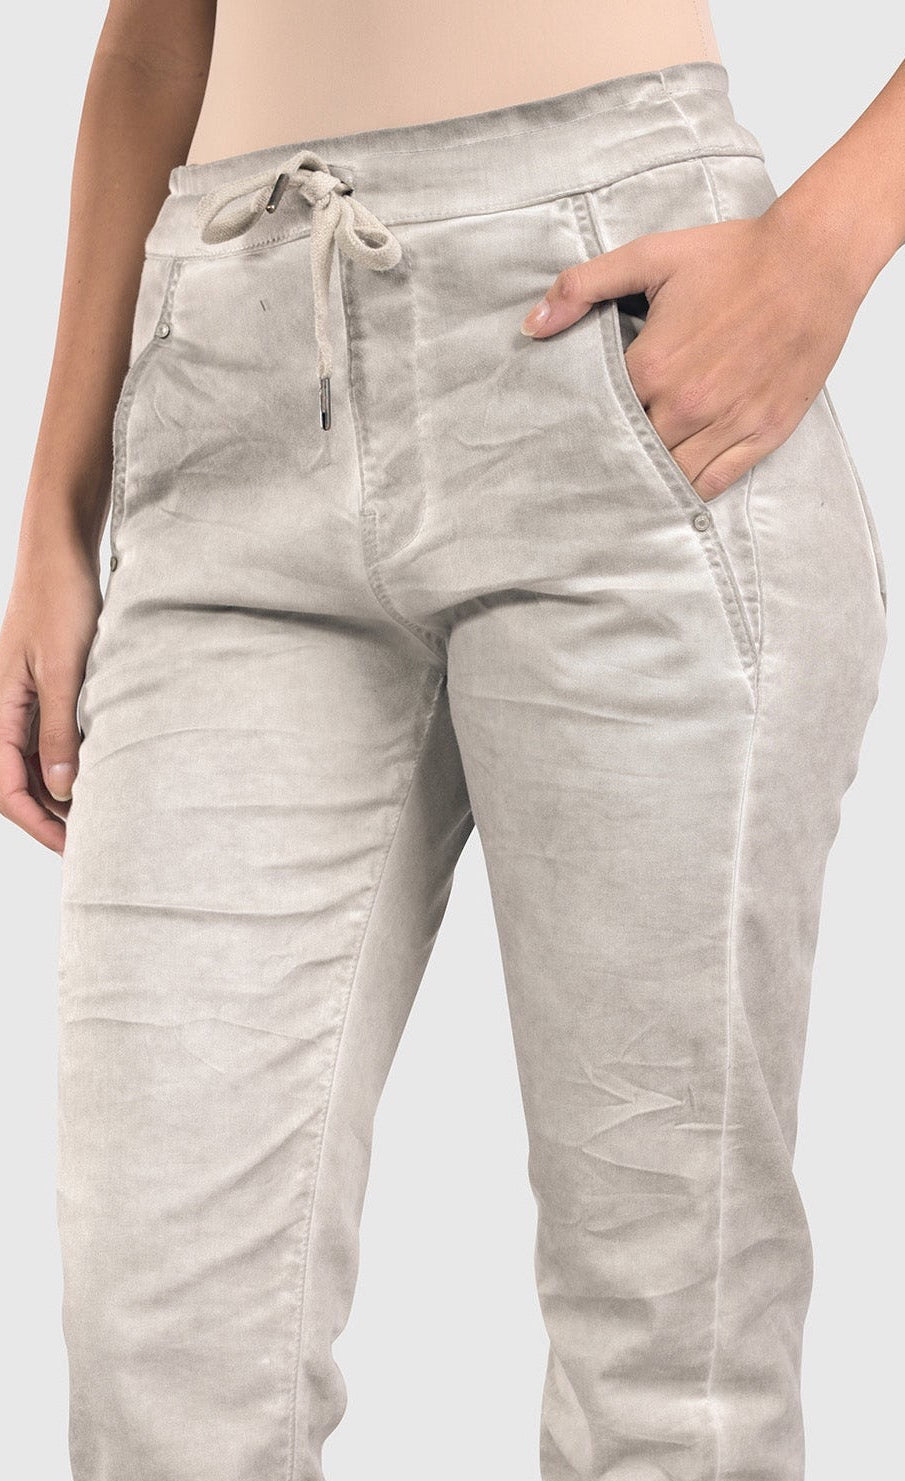 Front bottom half close up view of a woman wearing the alembika grey iconic stretch jeans. These light grey jeans have a drawstring waistband with a tie, two front pockets, and a relaxed slim/straight cut.